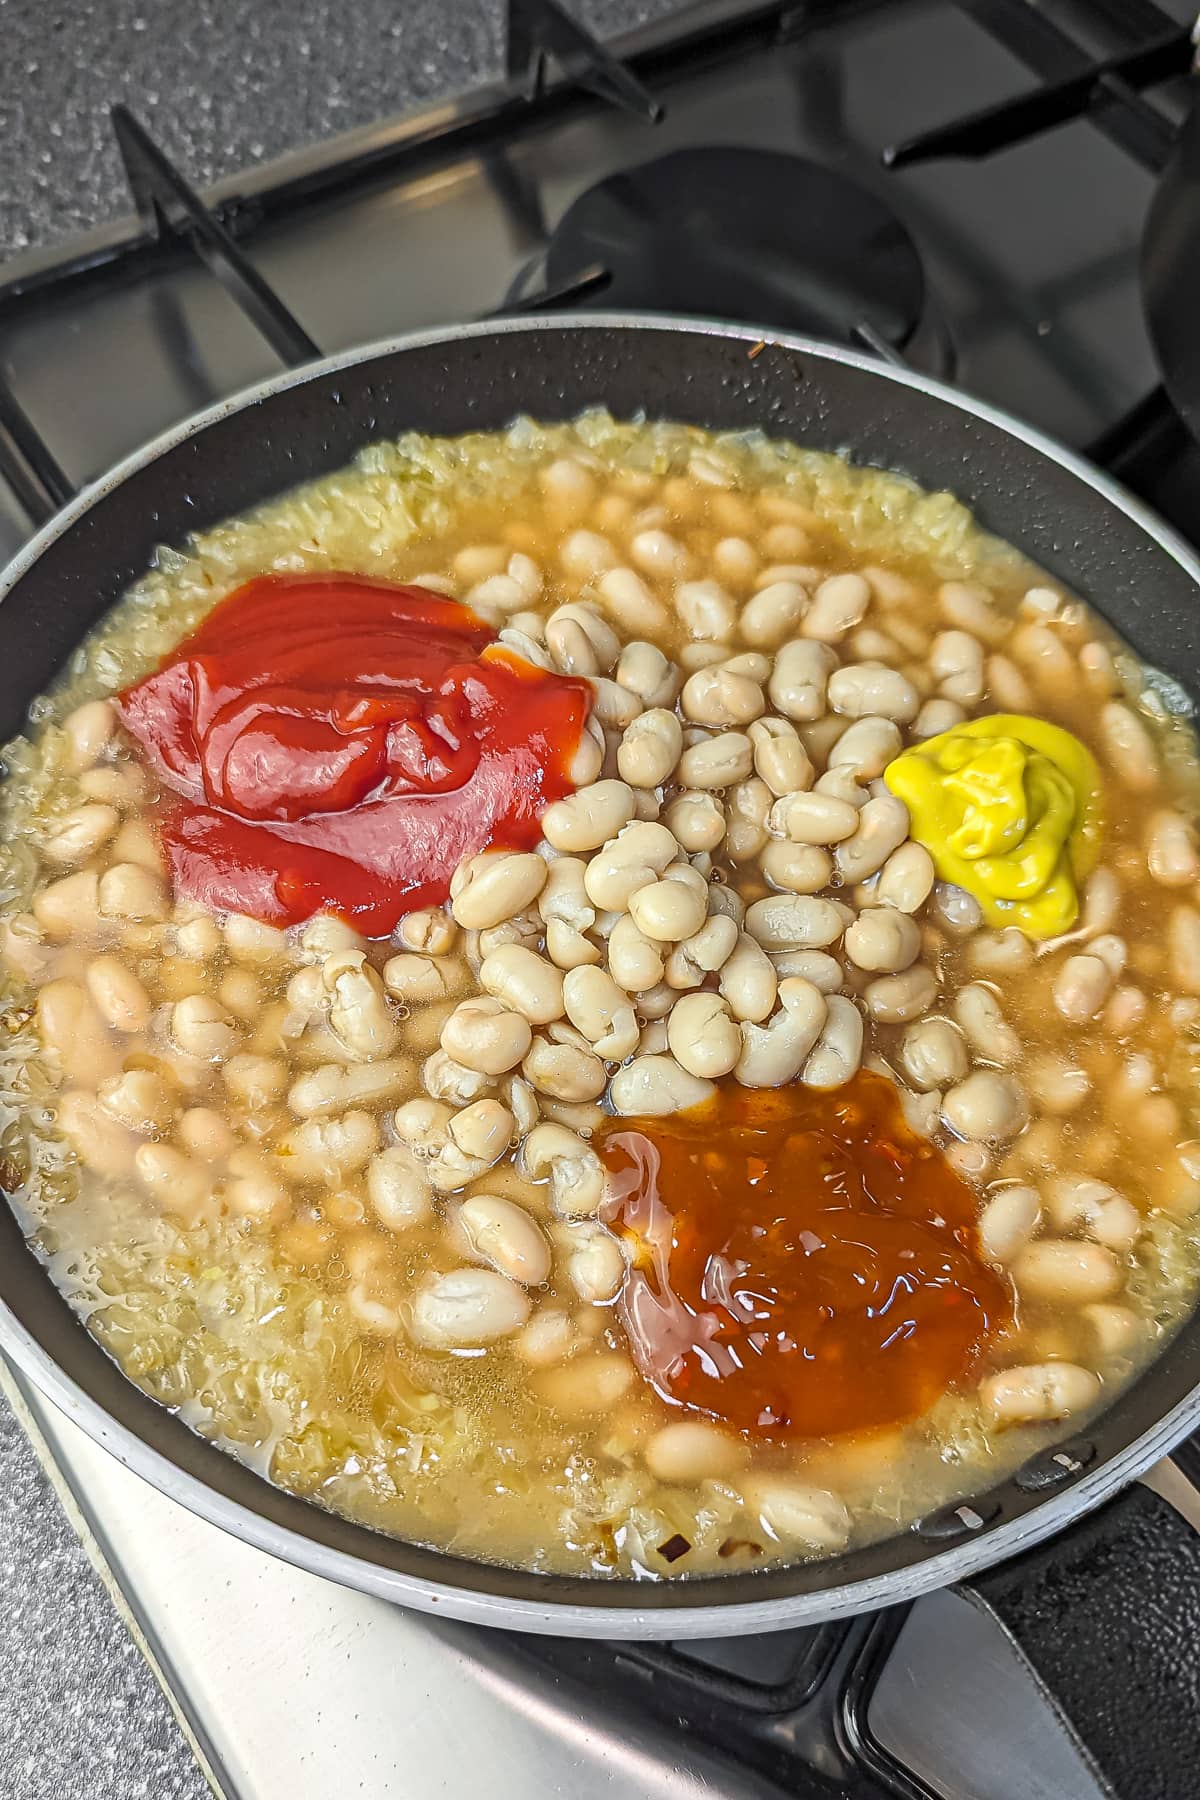 Beans cooking with ketchup, mustard, and chili sauce in a pan.